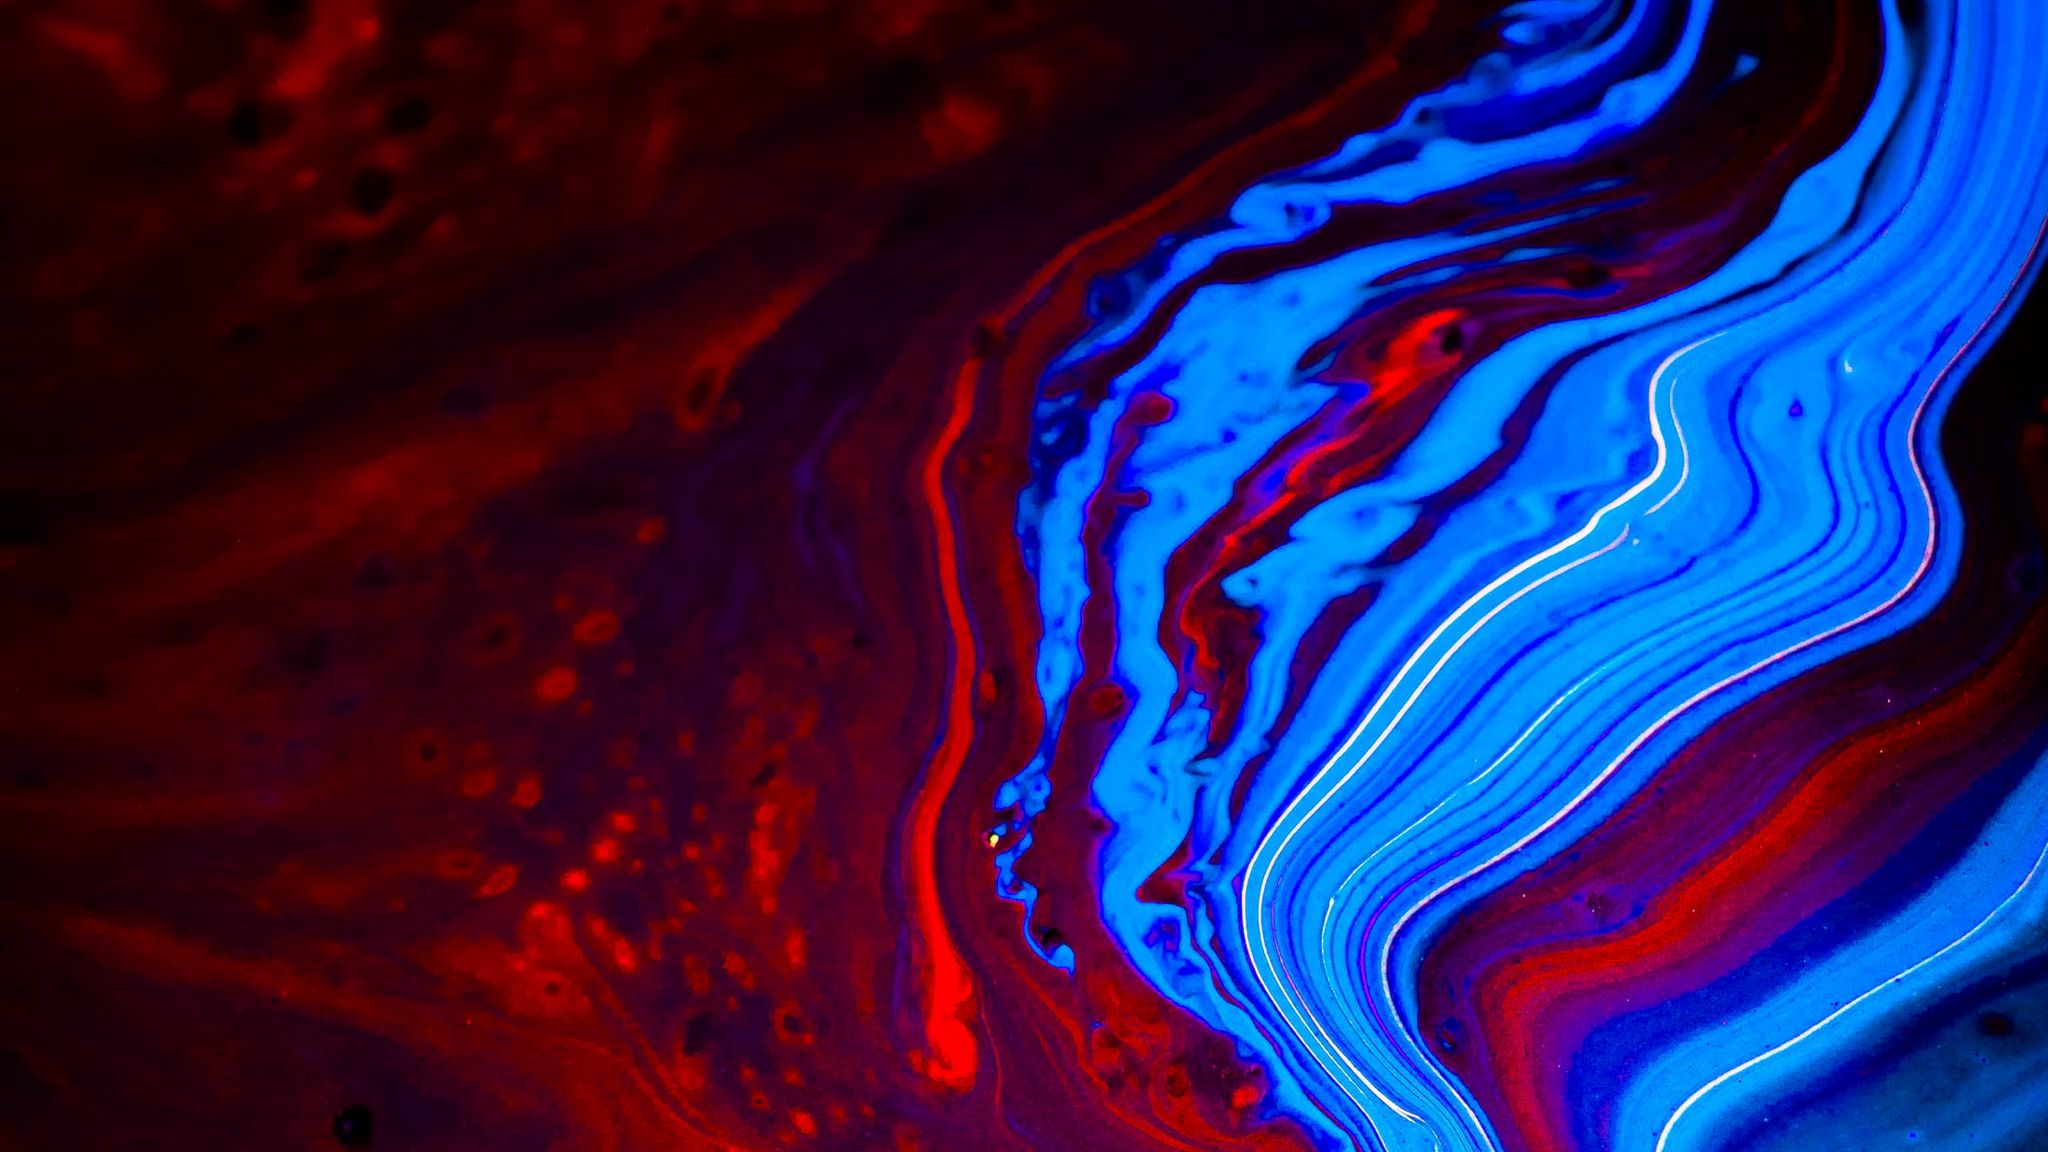 Download wallpaper 2048x1152 paint, liquid, fluid art, stains, distortion,  red, blue ultrawide monitor hd background